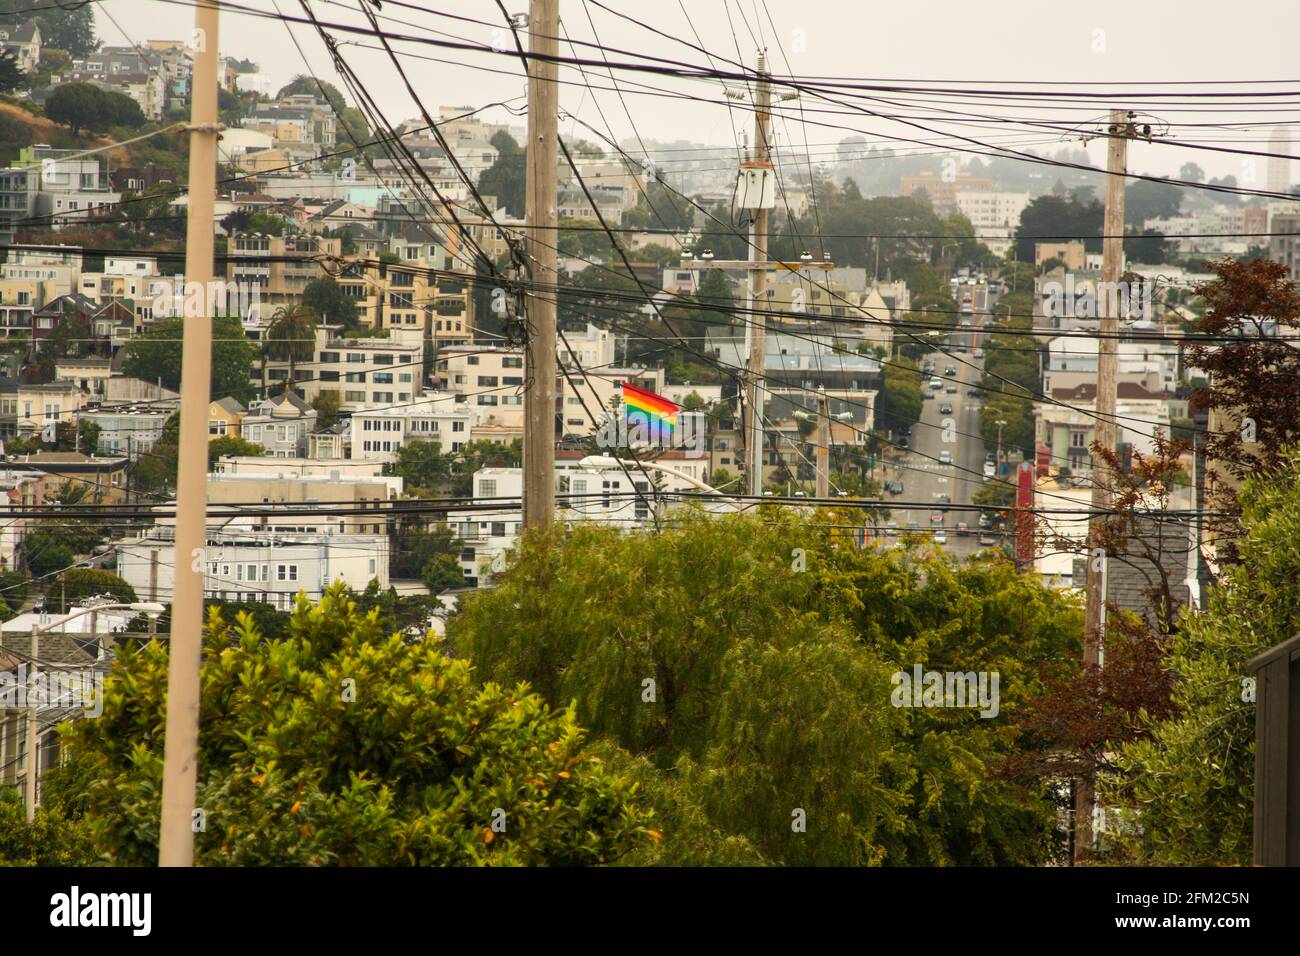 Panoramic shot of the rainbow flag in the Castro district, San Francisco - United States of America aka USA Stock Photo